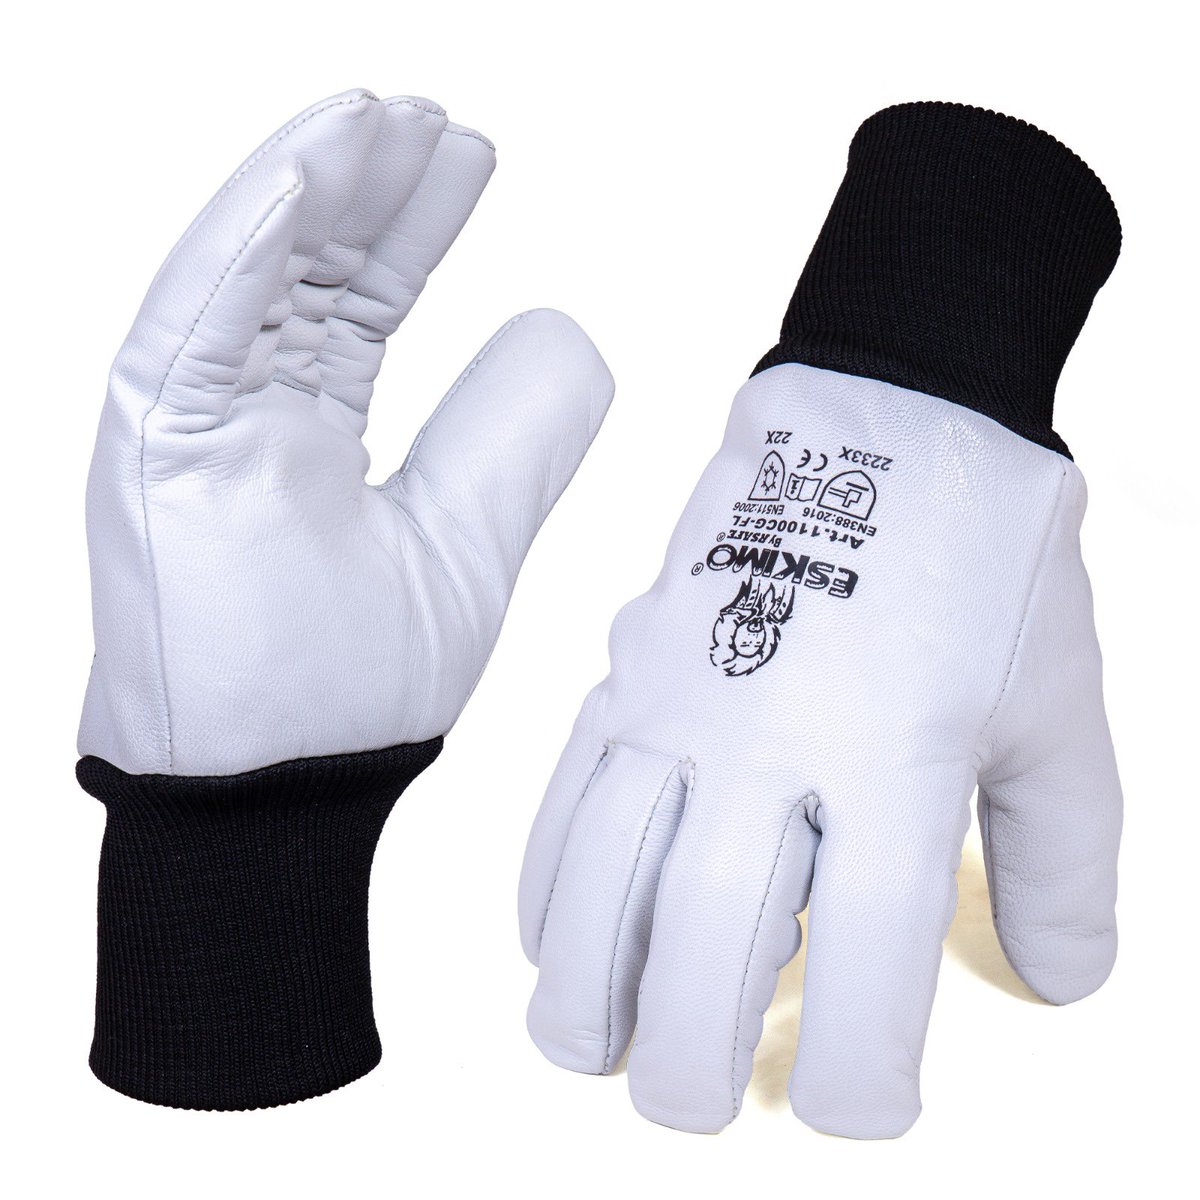 ESKİMO® Freezer Gloves
Premium Quality Water Resistance leather gloves, with knitted wrist, Inside 3M®Thinsulate lining with DryTuff® material to keep your hands warm and dry.

#eskimogloves #freezergloves #rsafegloves #drytuff #drytuffwaterproofmembrane #wintergloves #workgloves